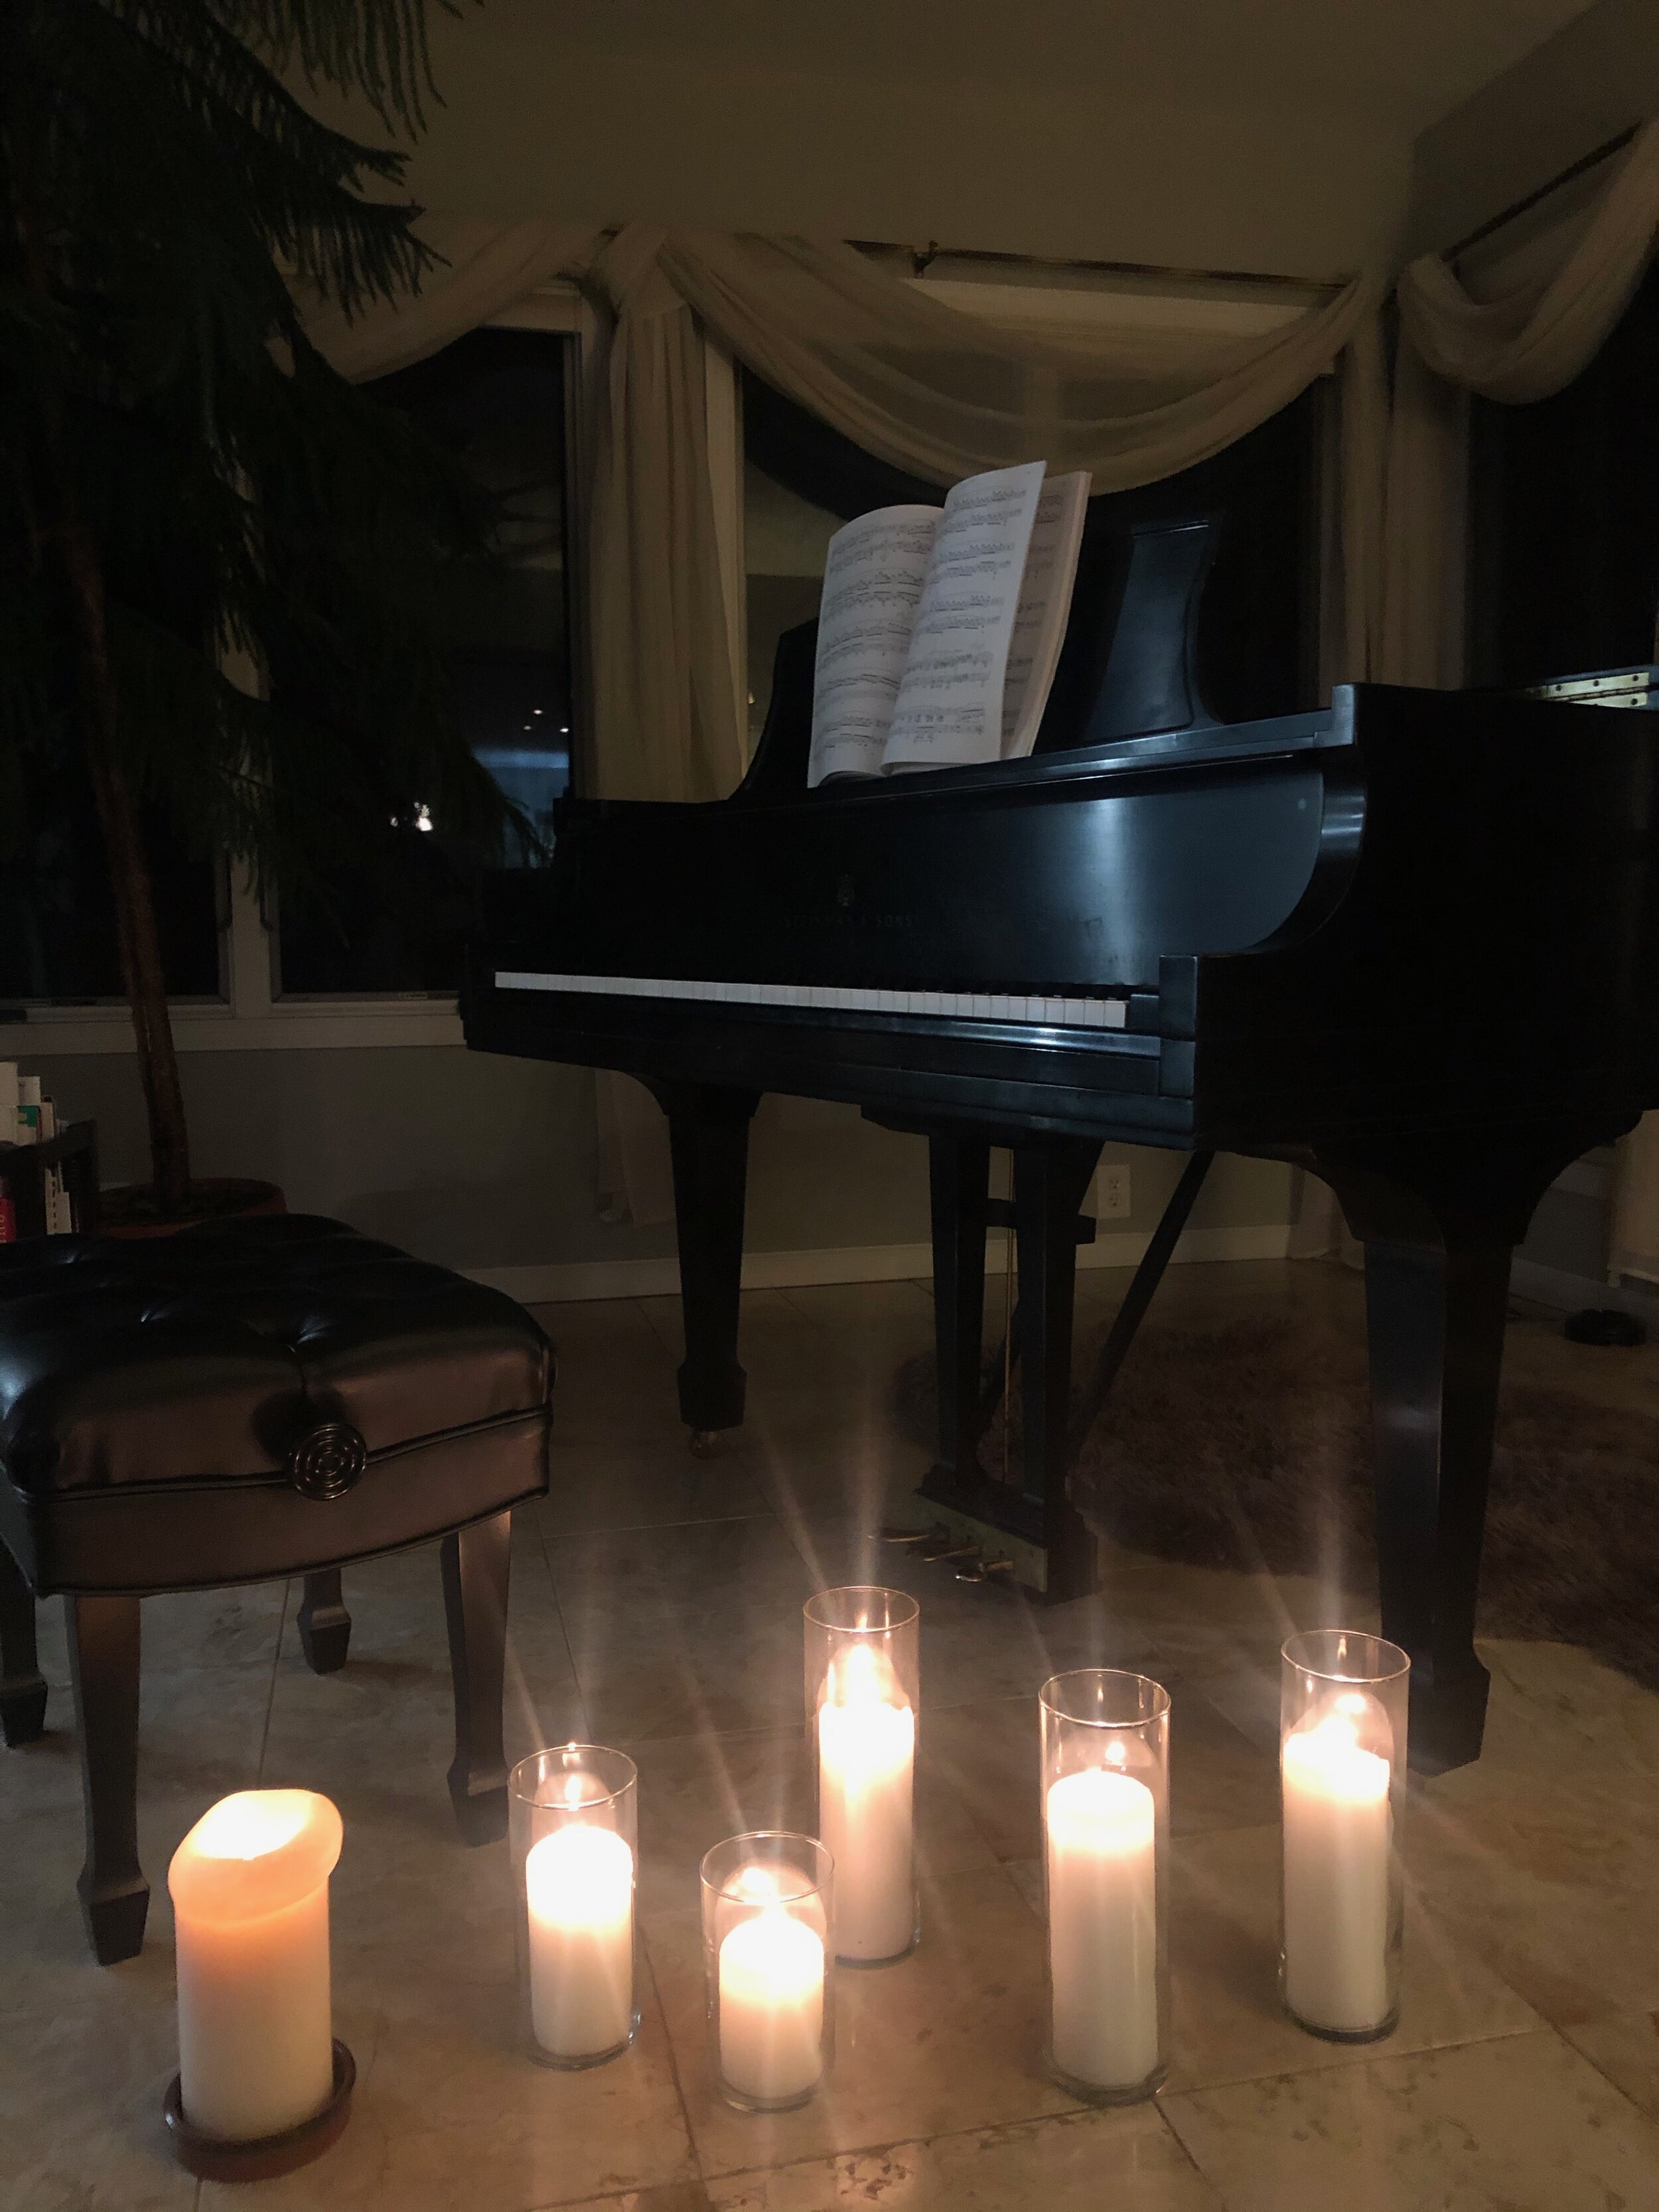 A candle lit evening performance